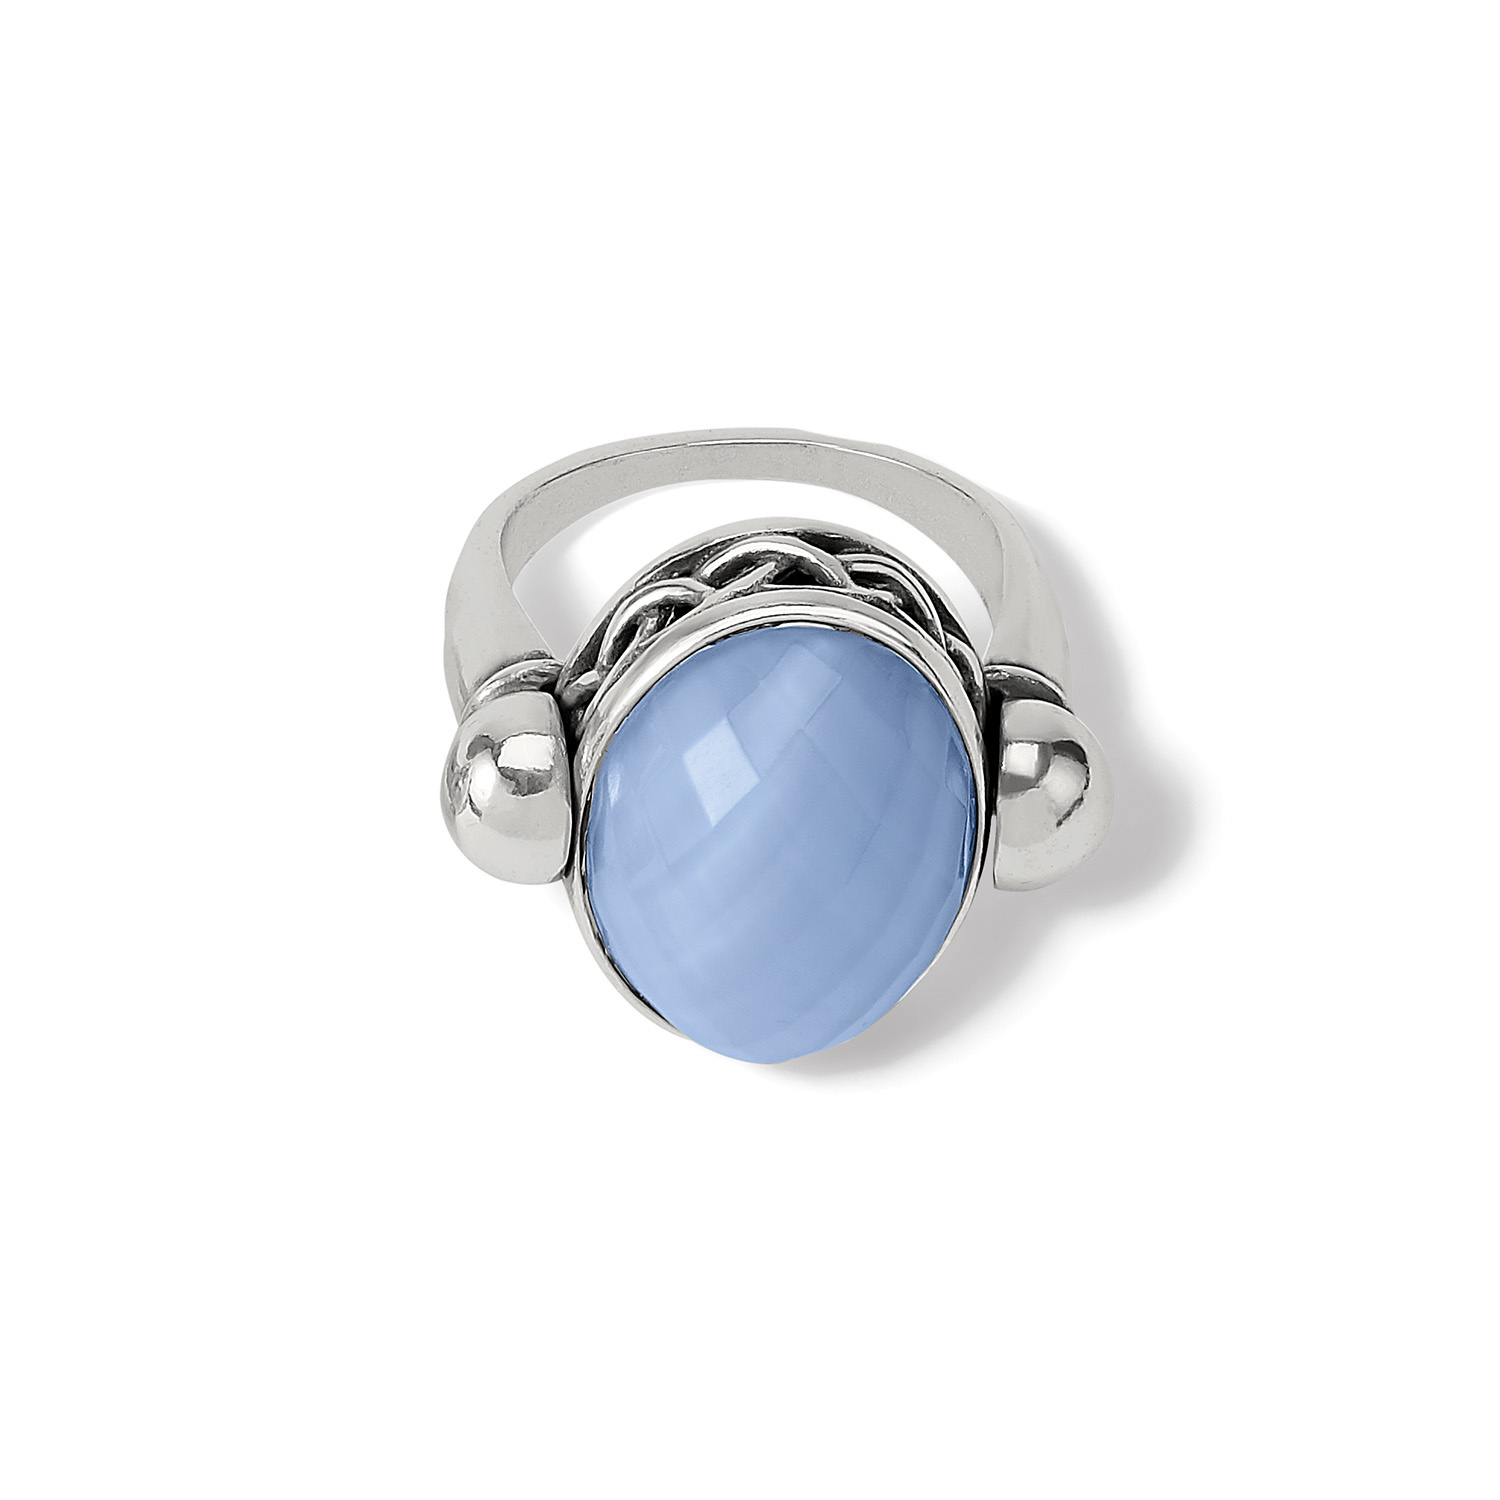 Decorated 925 Sterling Silver Ring with a Blue Zircon Stone